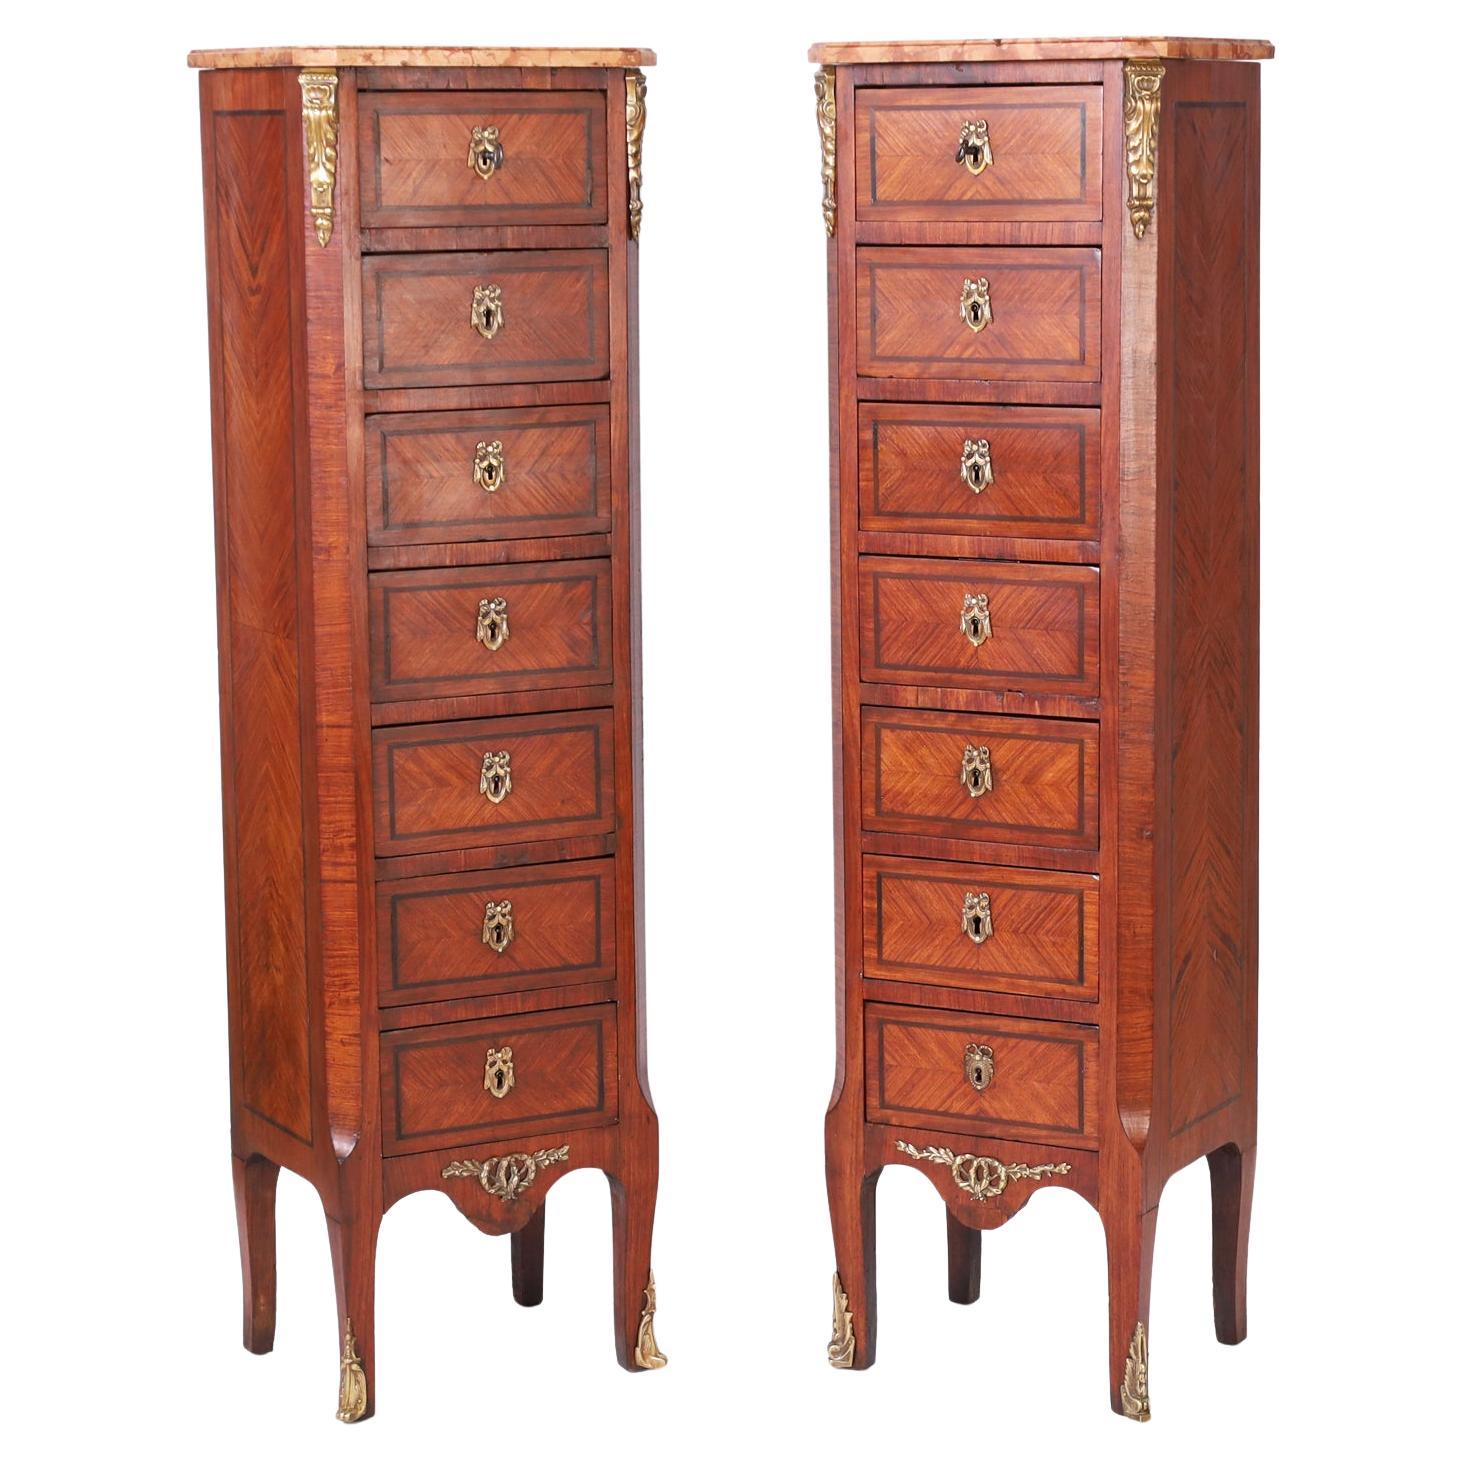 Pair of Antique French Louis XV Style Lingerie Chests